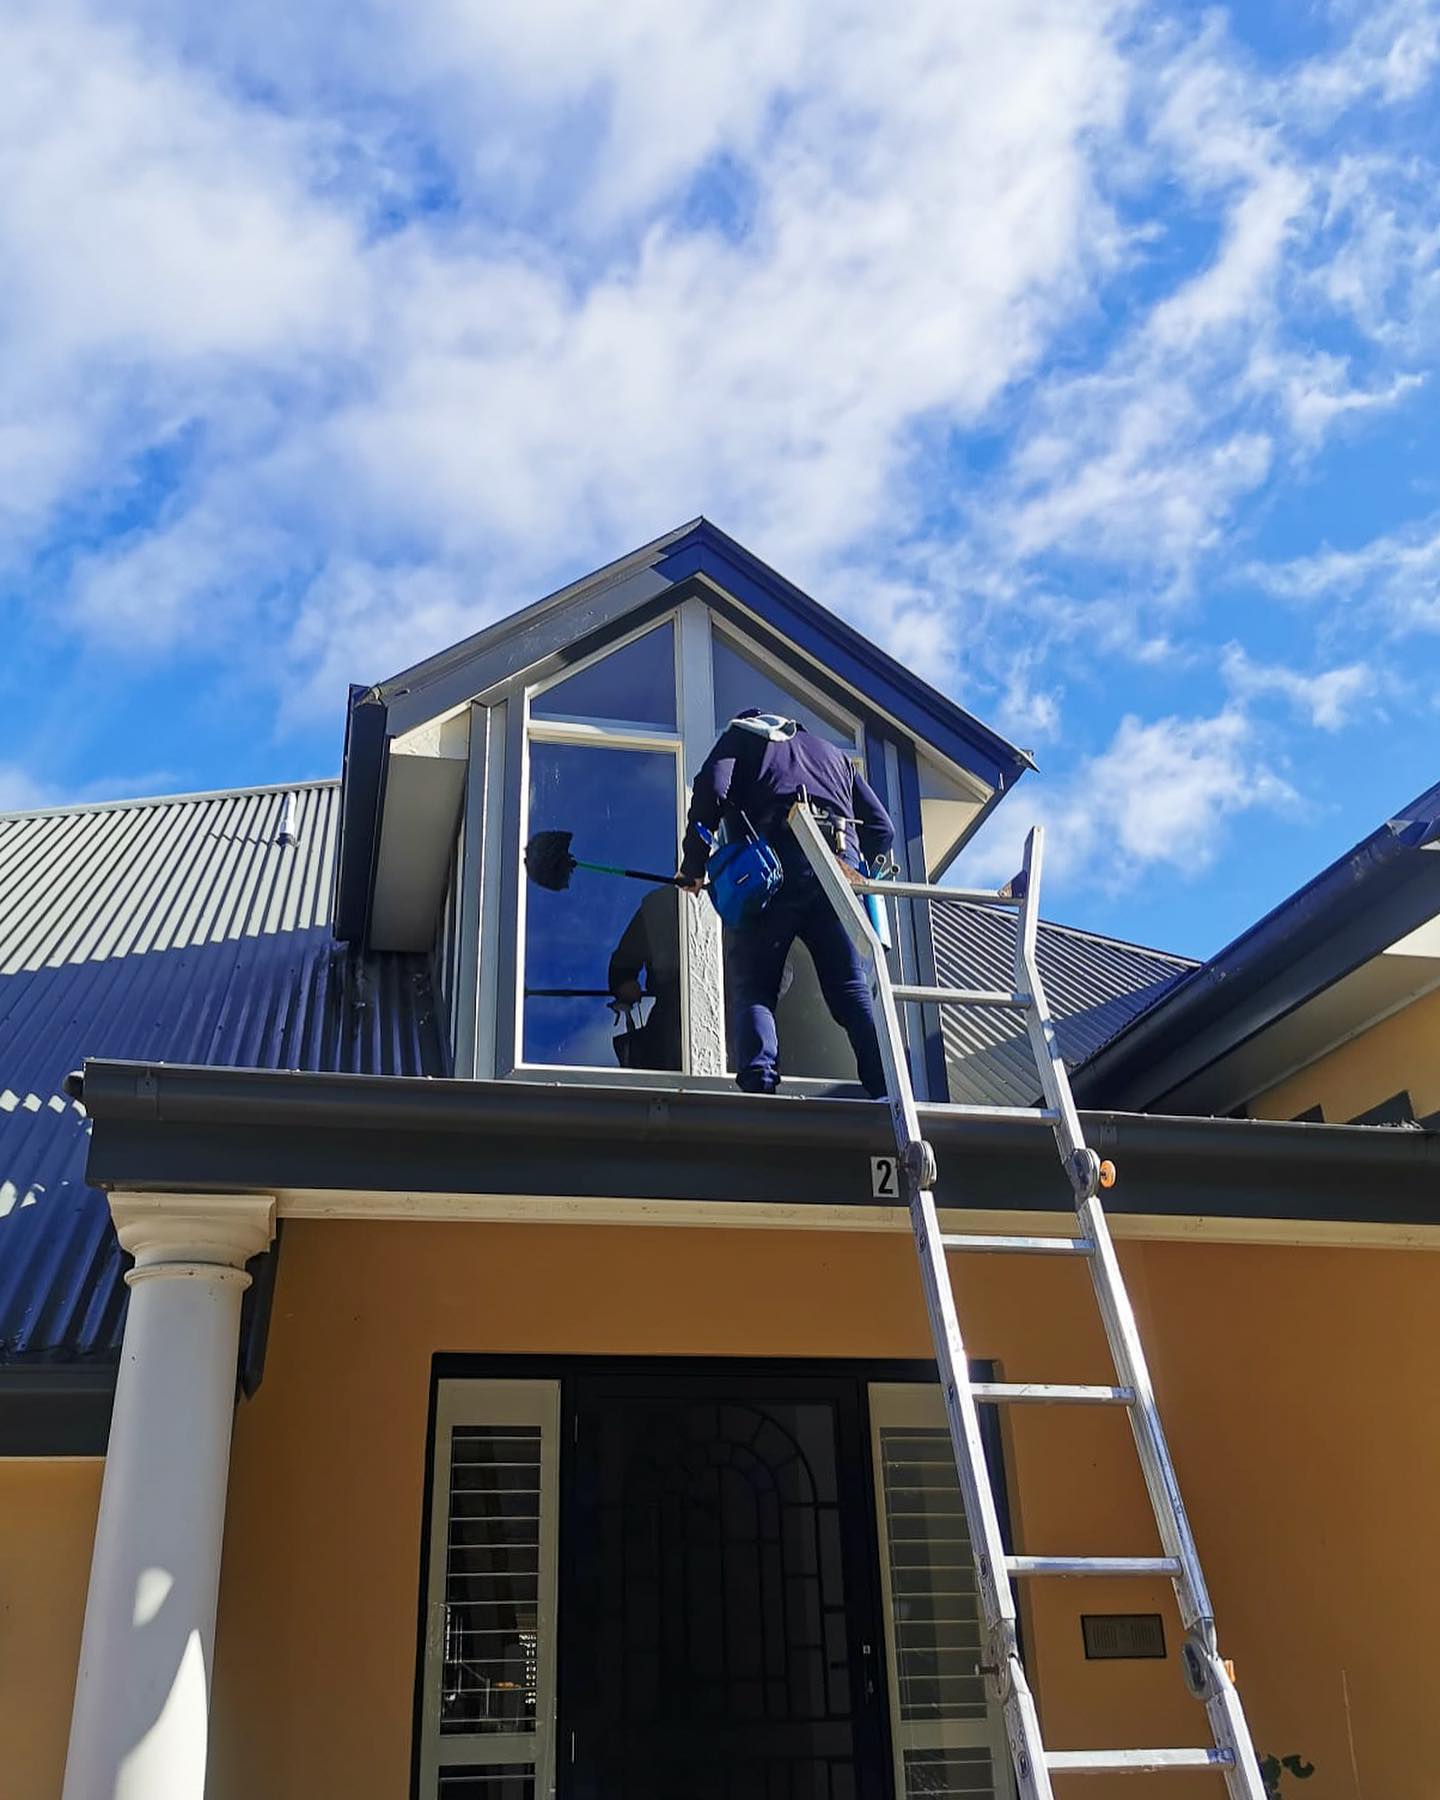 Man Cleaning External Home Windows - Window Cleaning in Southern Highlands, NSW